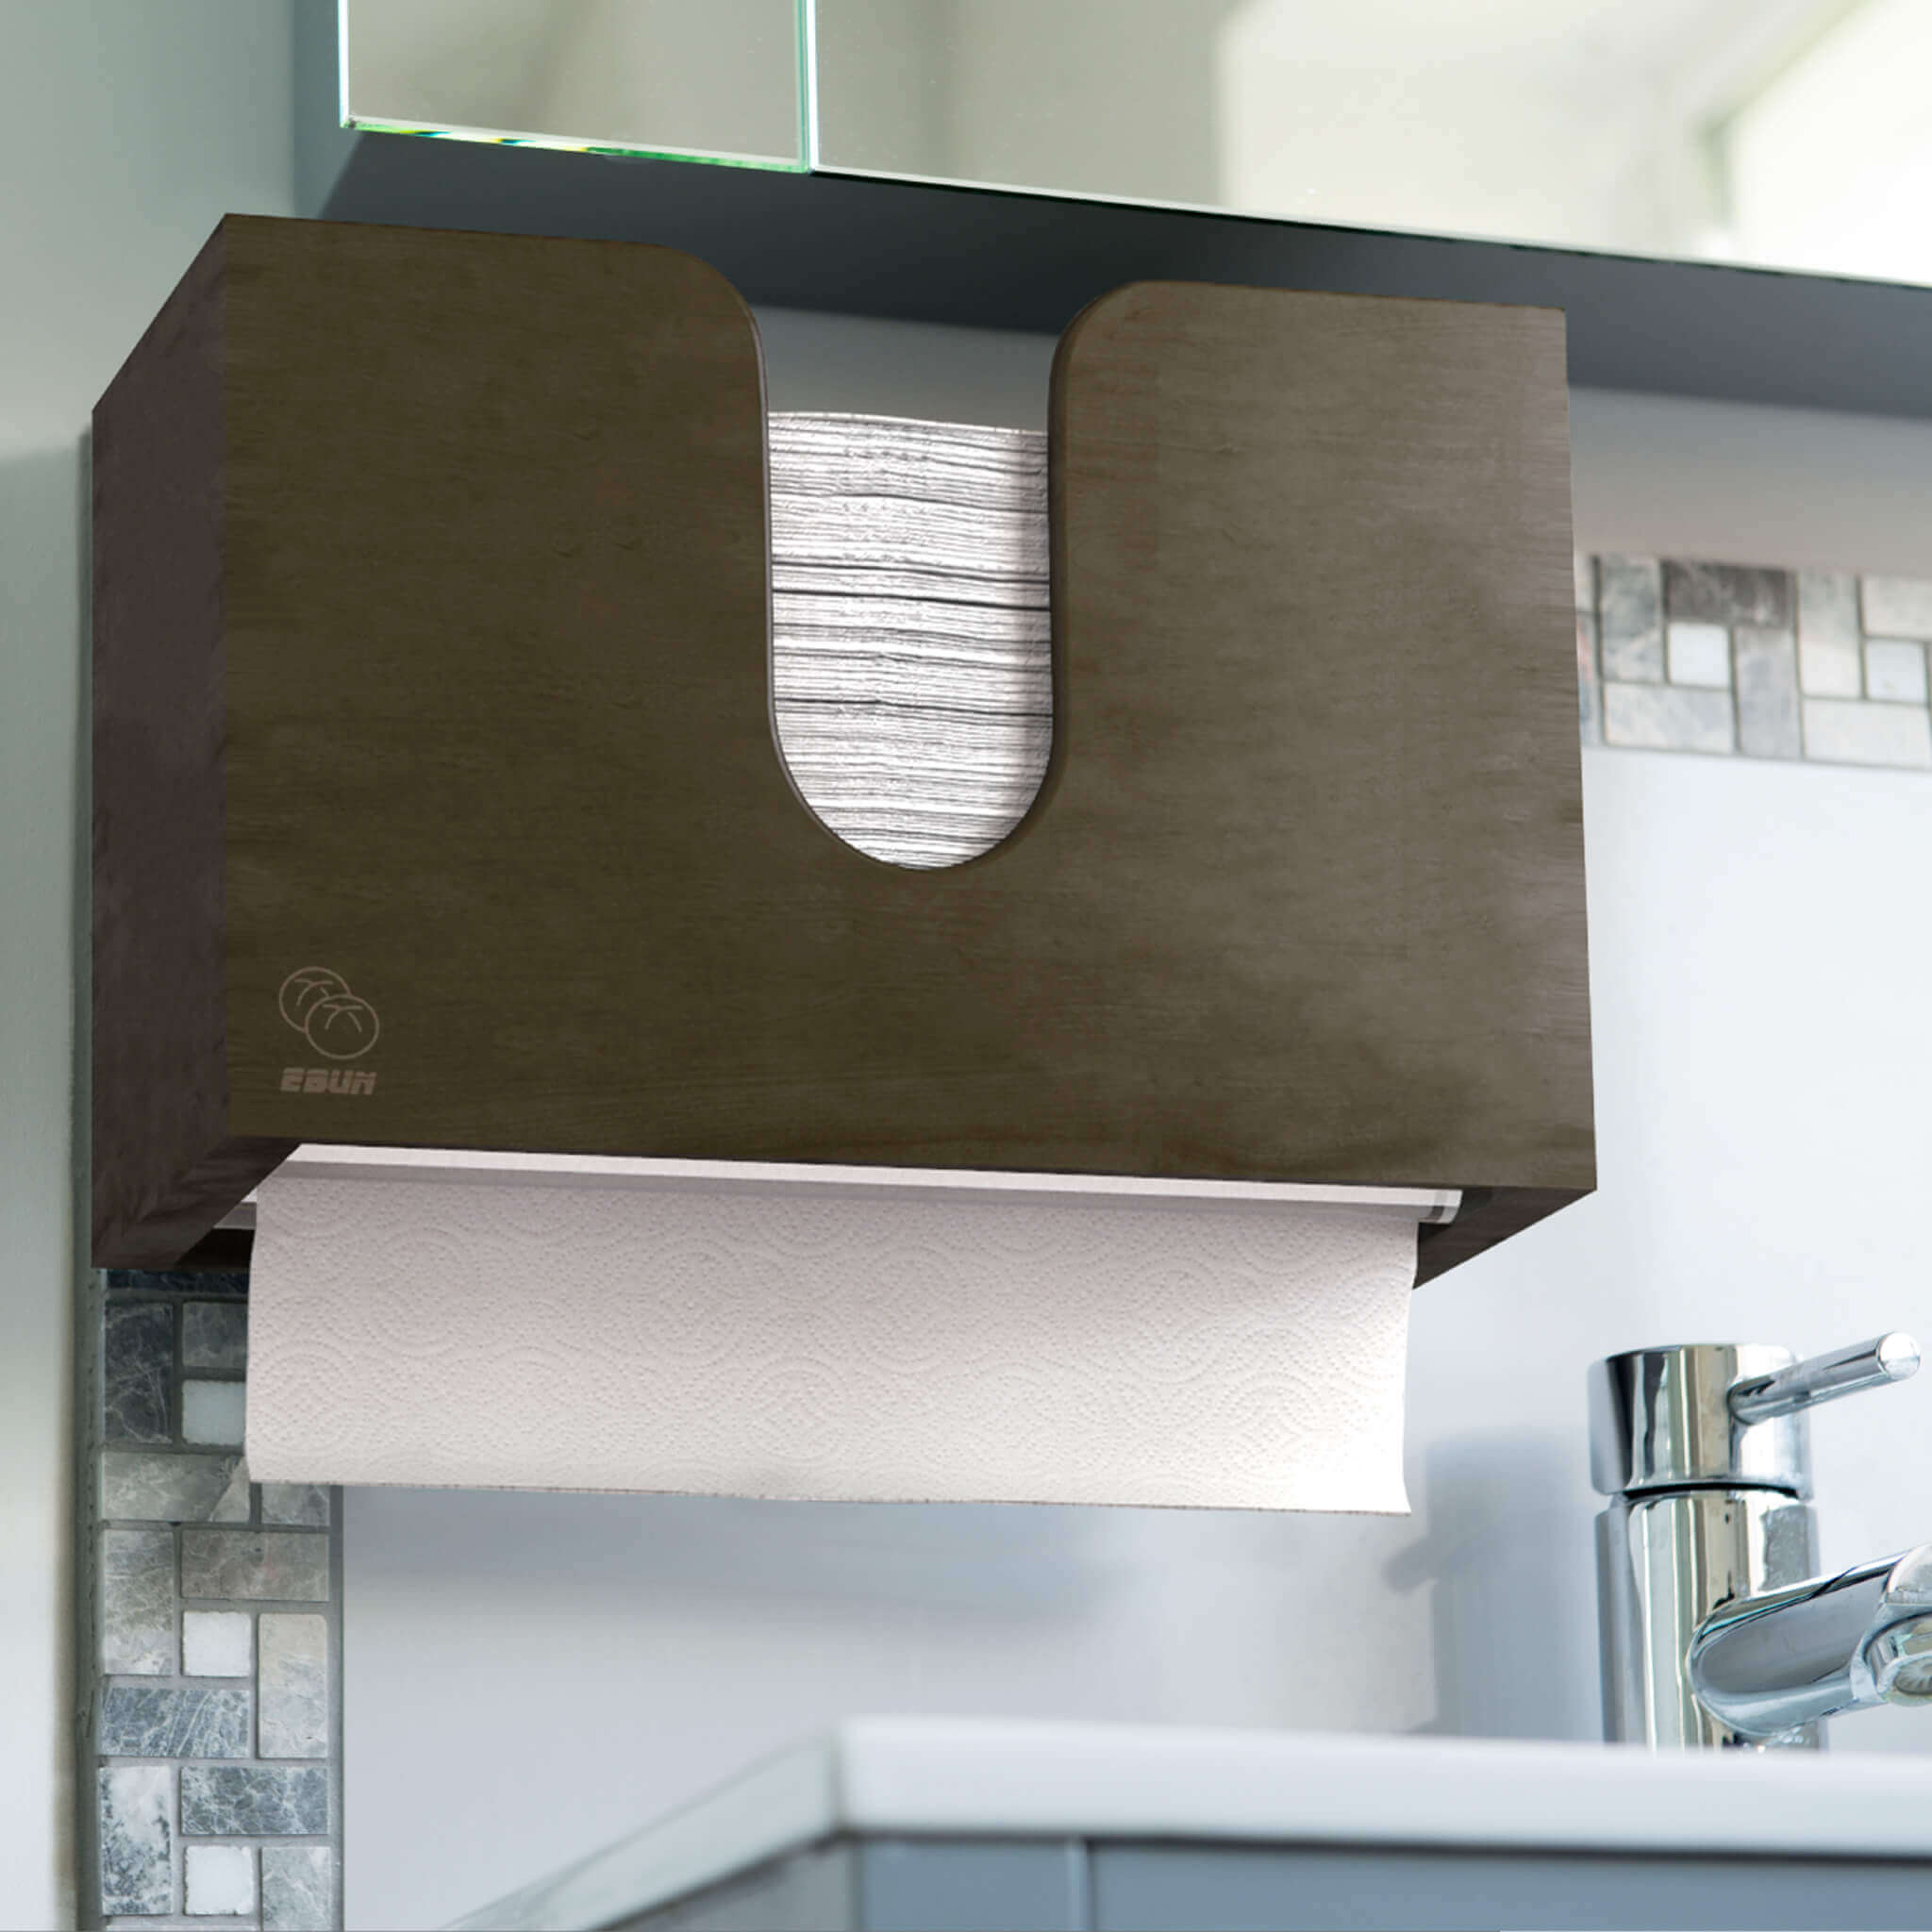  BAUBUY Automatic Induction Paper Towel Dispenser with